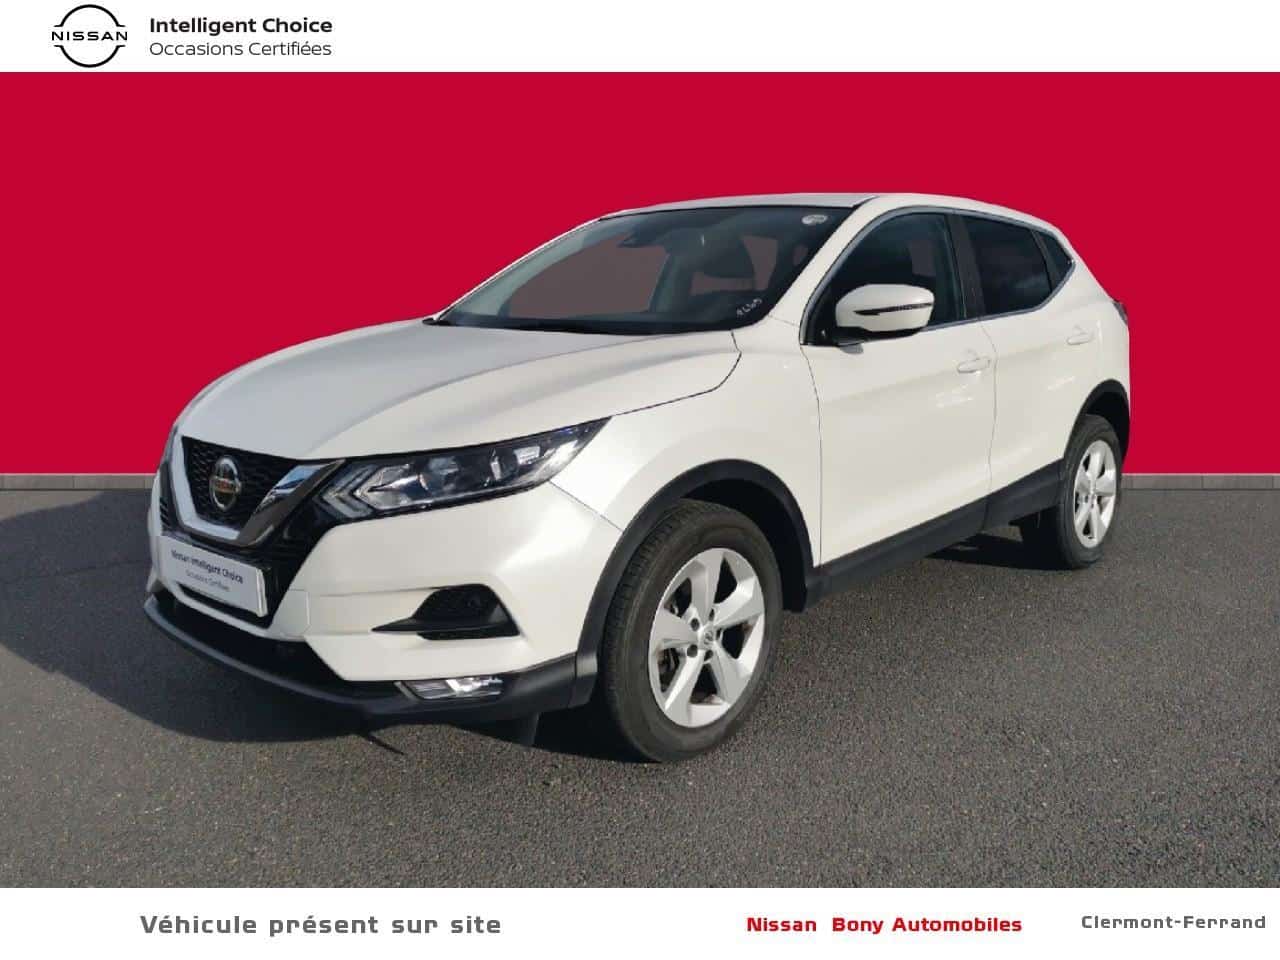 Nissan Qashqai 1.5 DCI 115 DCT BUSINESS EDITION